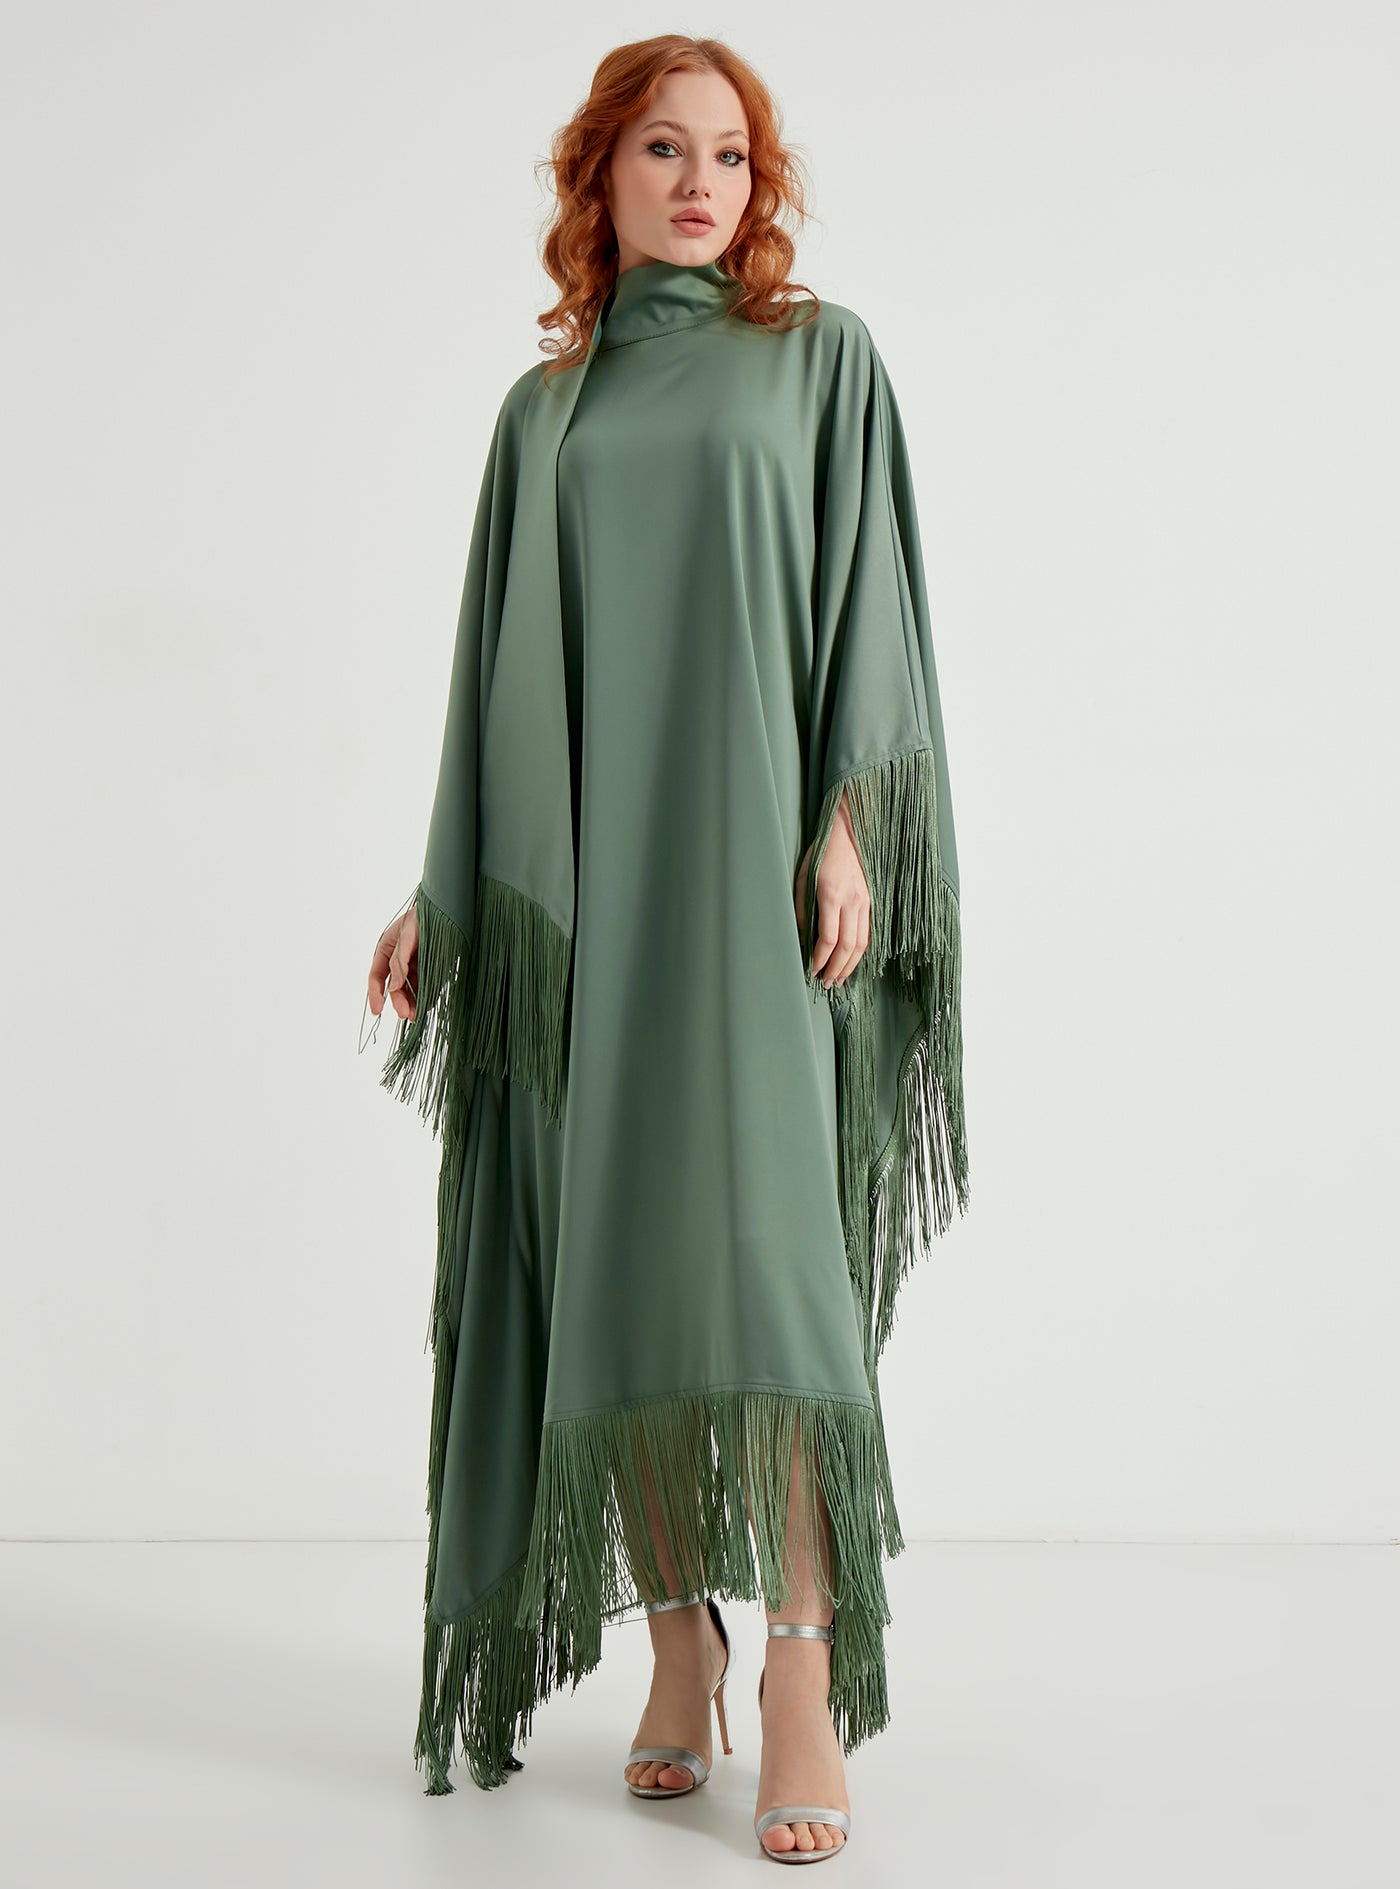 Mint Fringed Kaftan Dress With Tie Neck Detailed